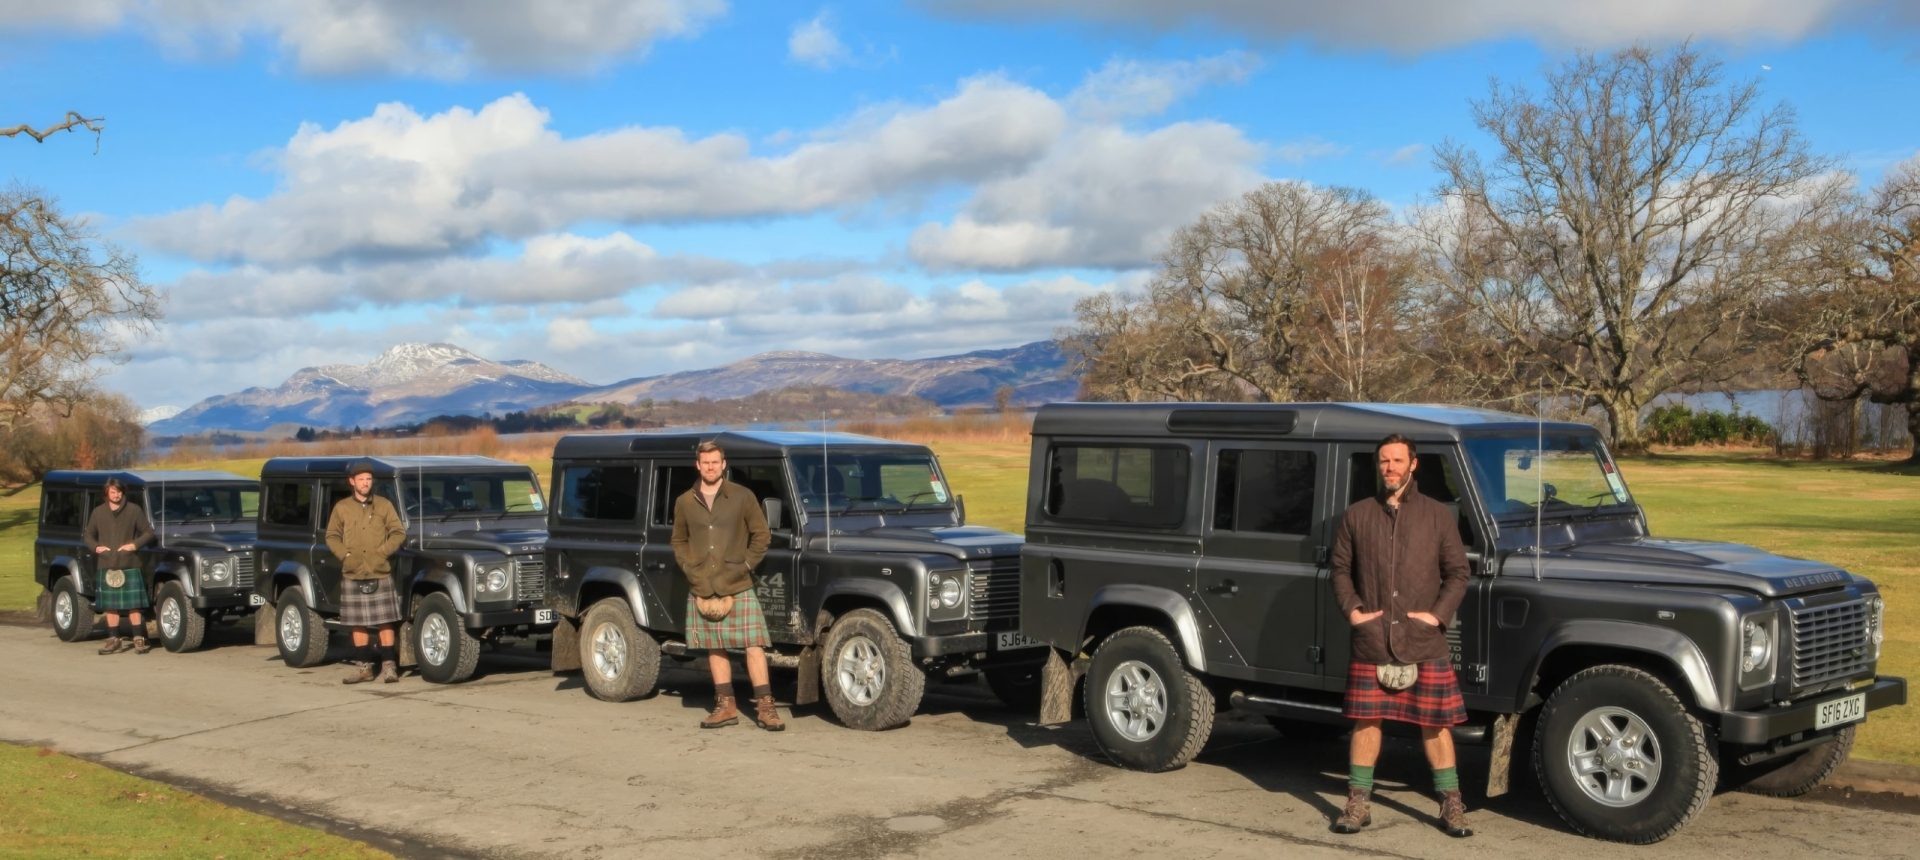 a group of 4 men standing in front of 4 black SUVs